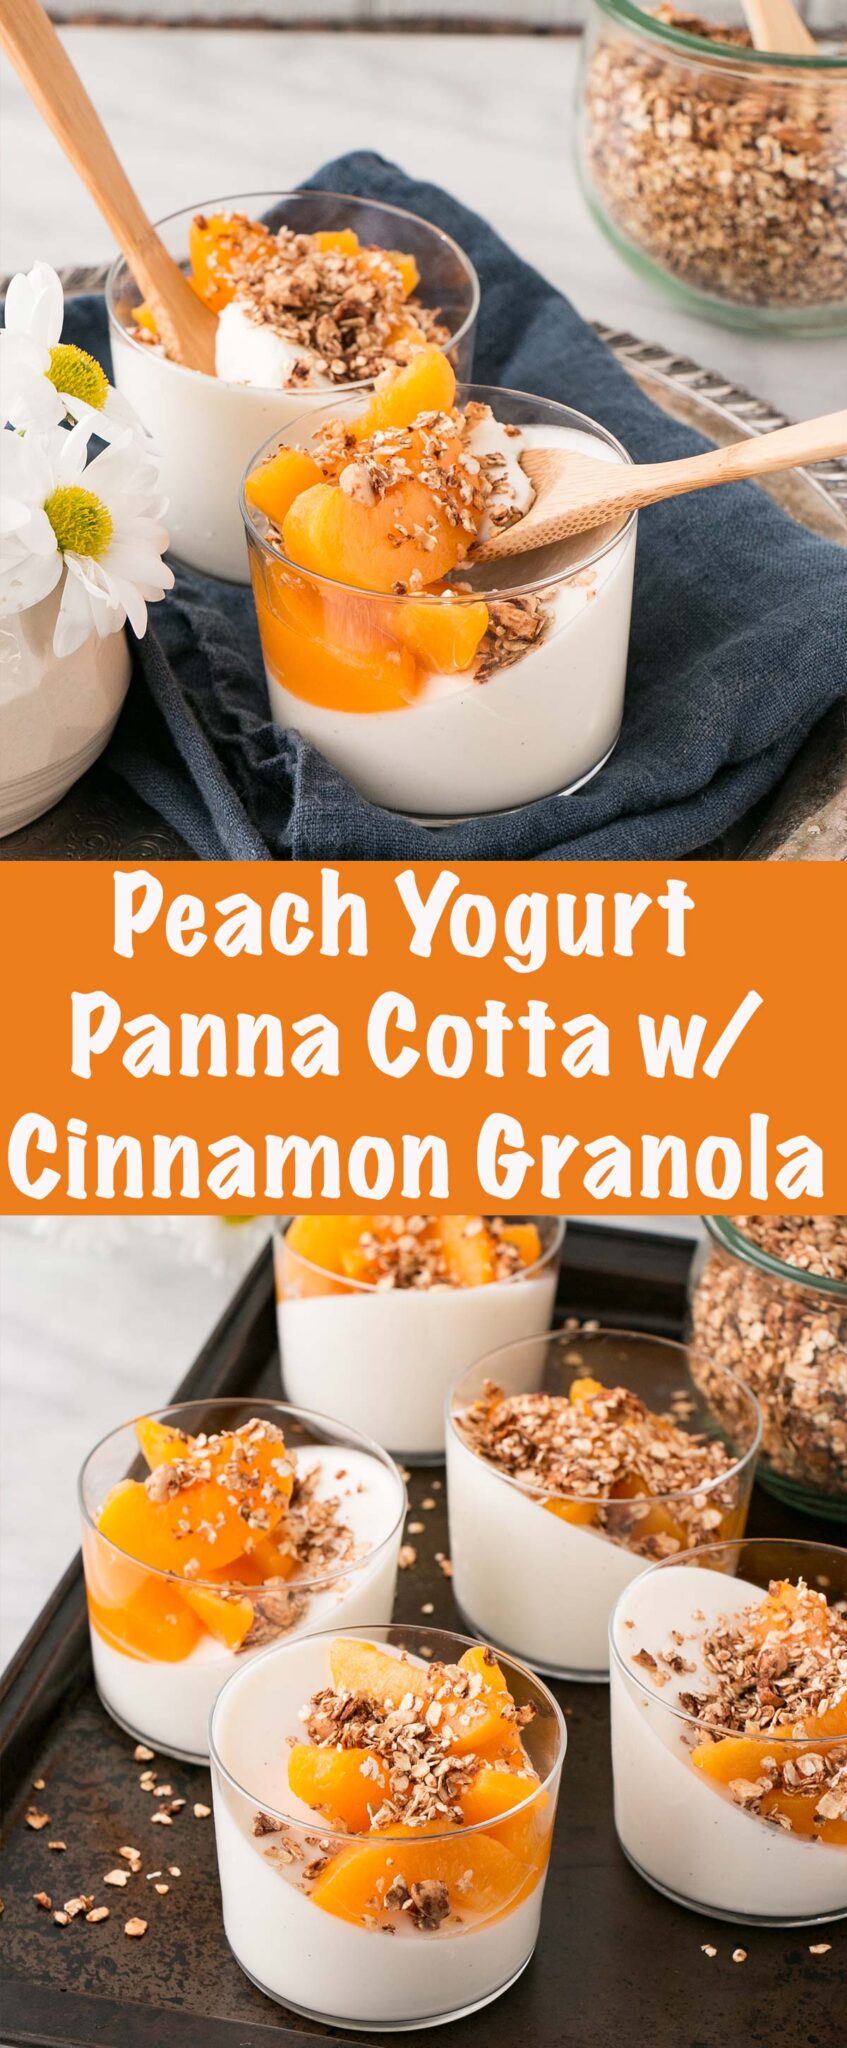 Yogurt Panna Cotta with Peaches and Cinnamon Granola is a dreamy make-ahead breakfast! Make-ahead for entertaining, Mother's Day, Valentine's Day or anytime you need a special treat for breakfast! via @mykitchenlove